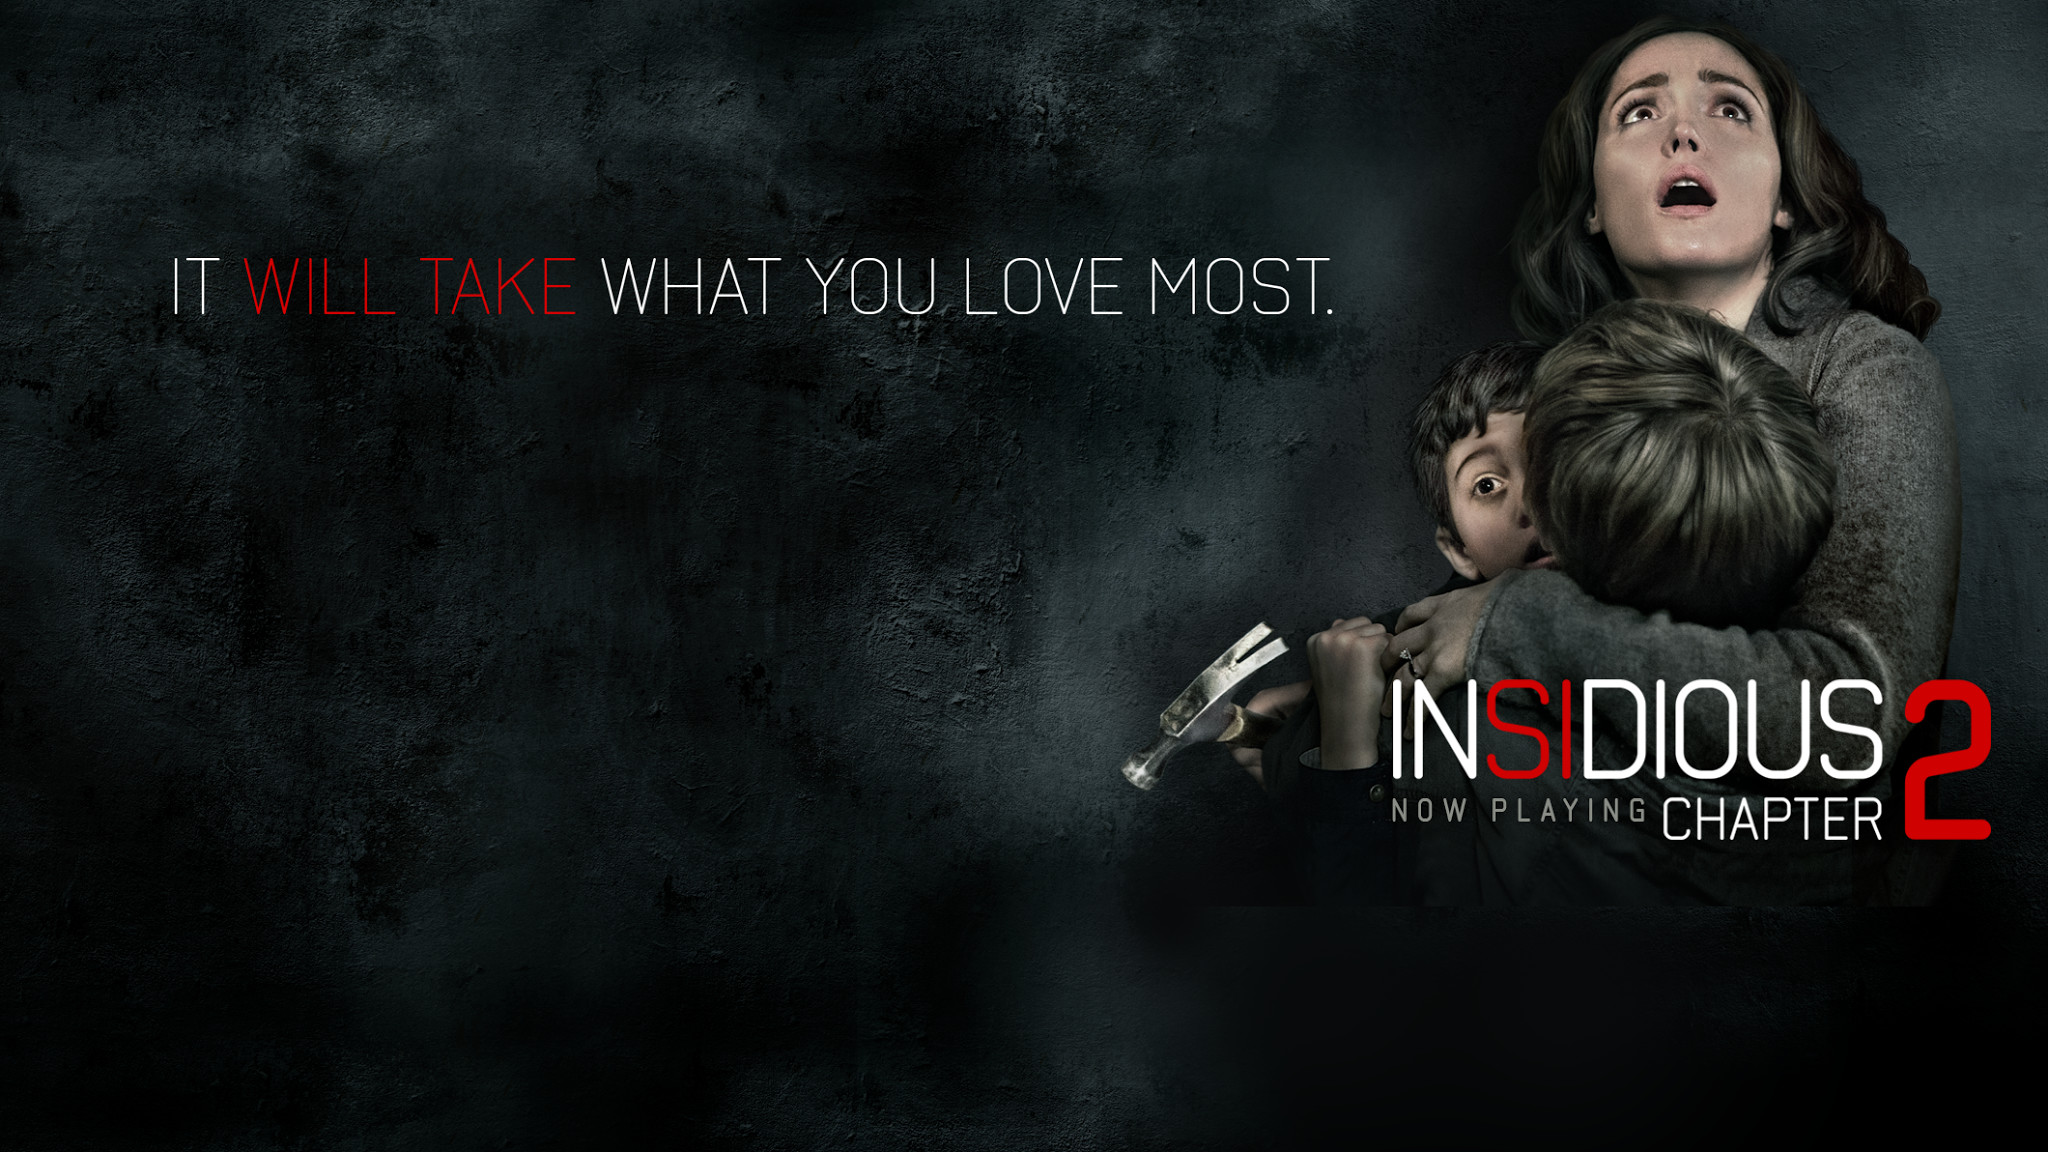 Download Insidious Horror Movie Poster HD Wallpaper. Search more high .